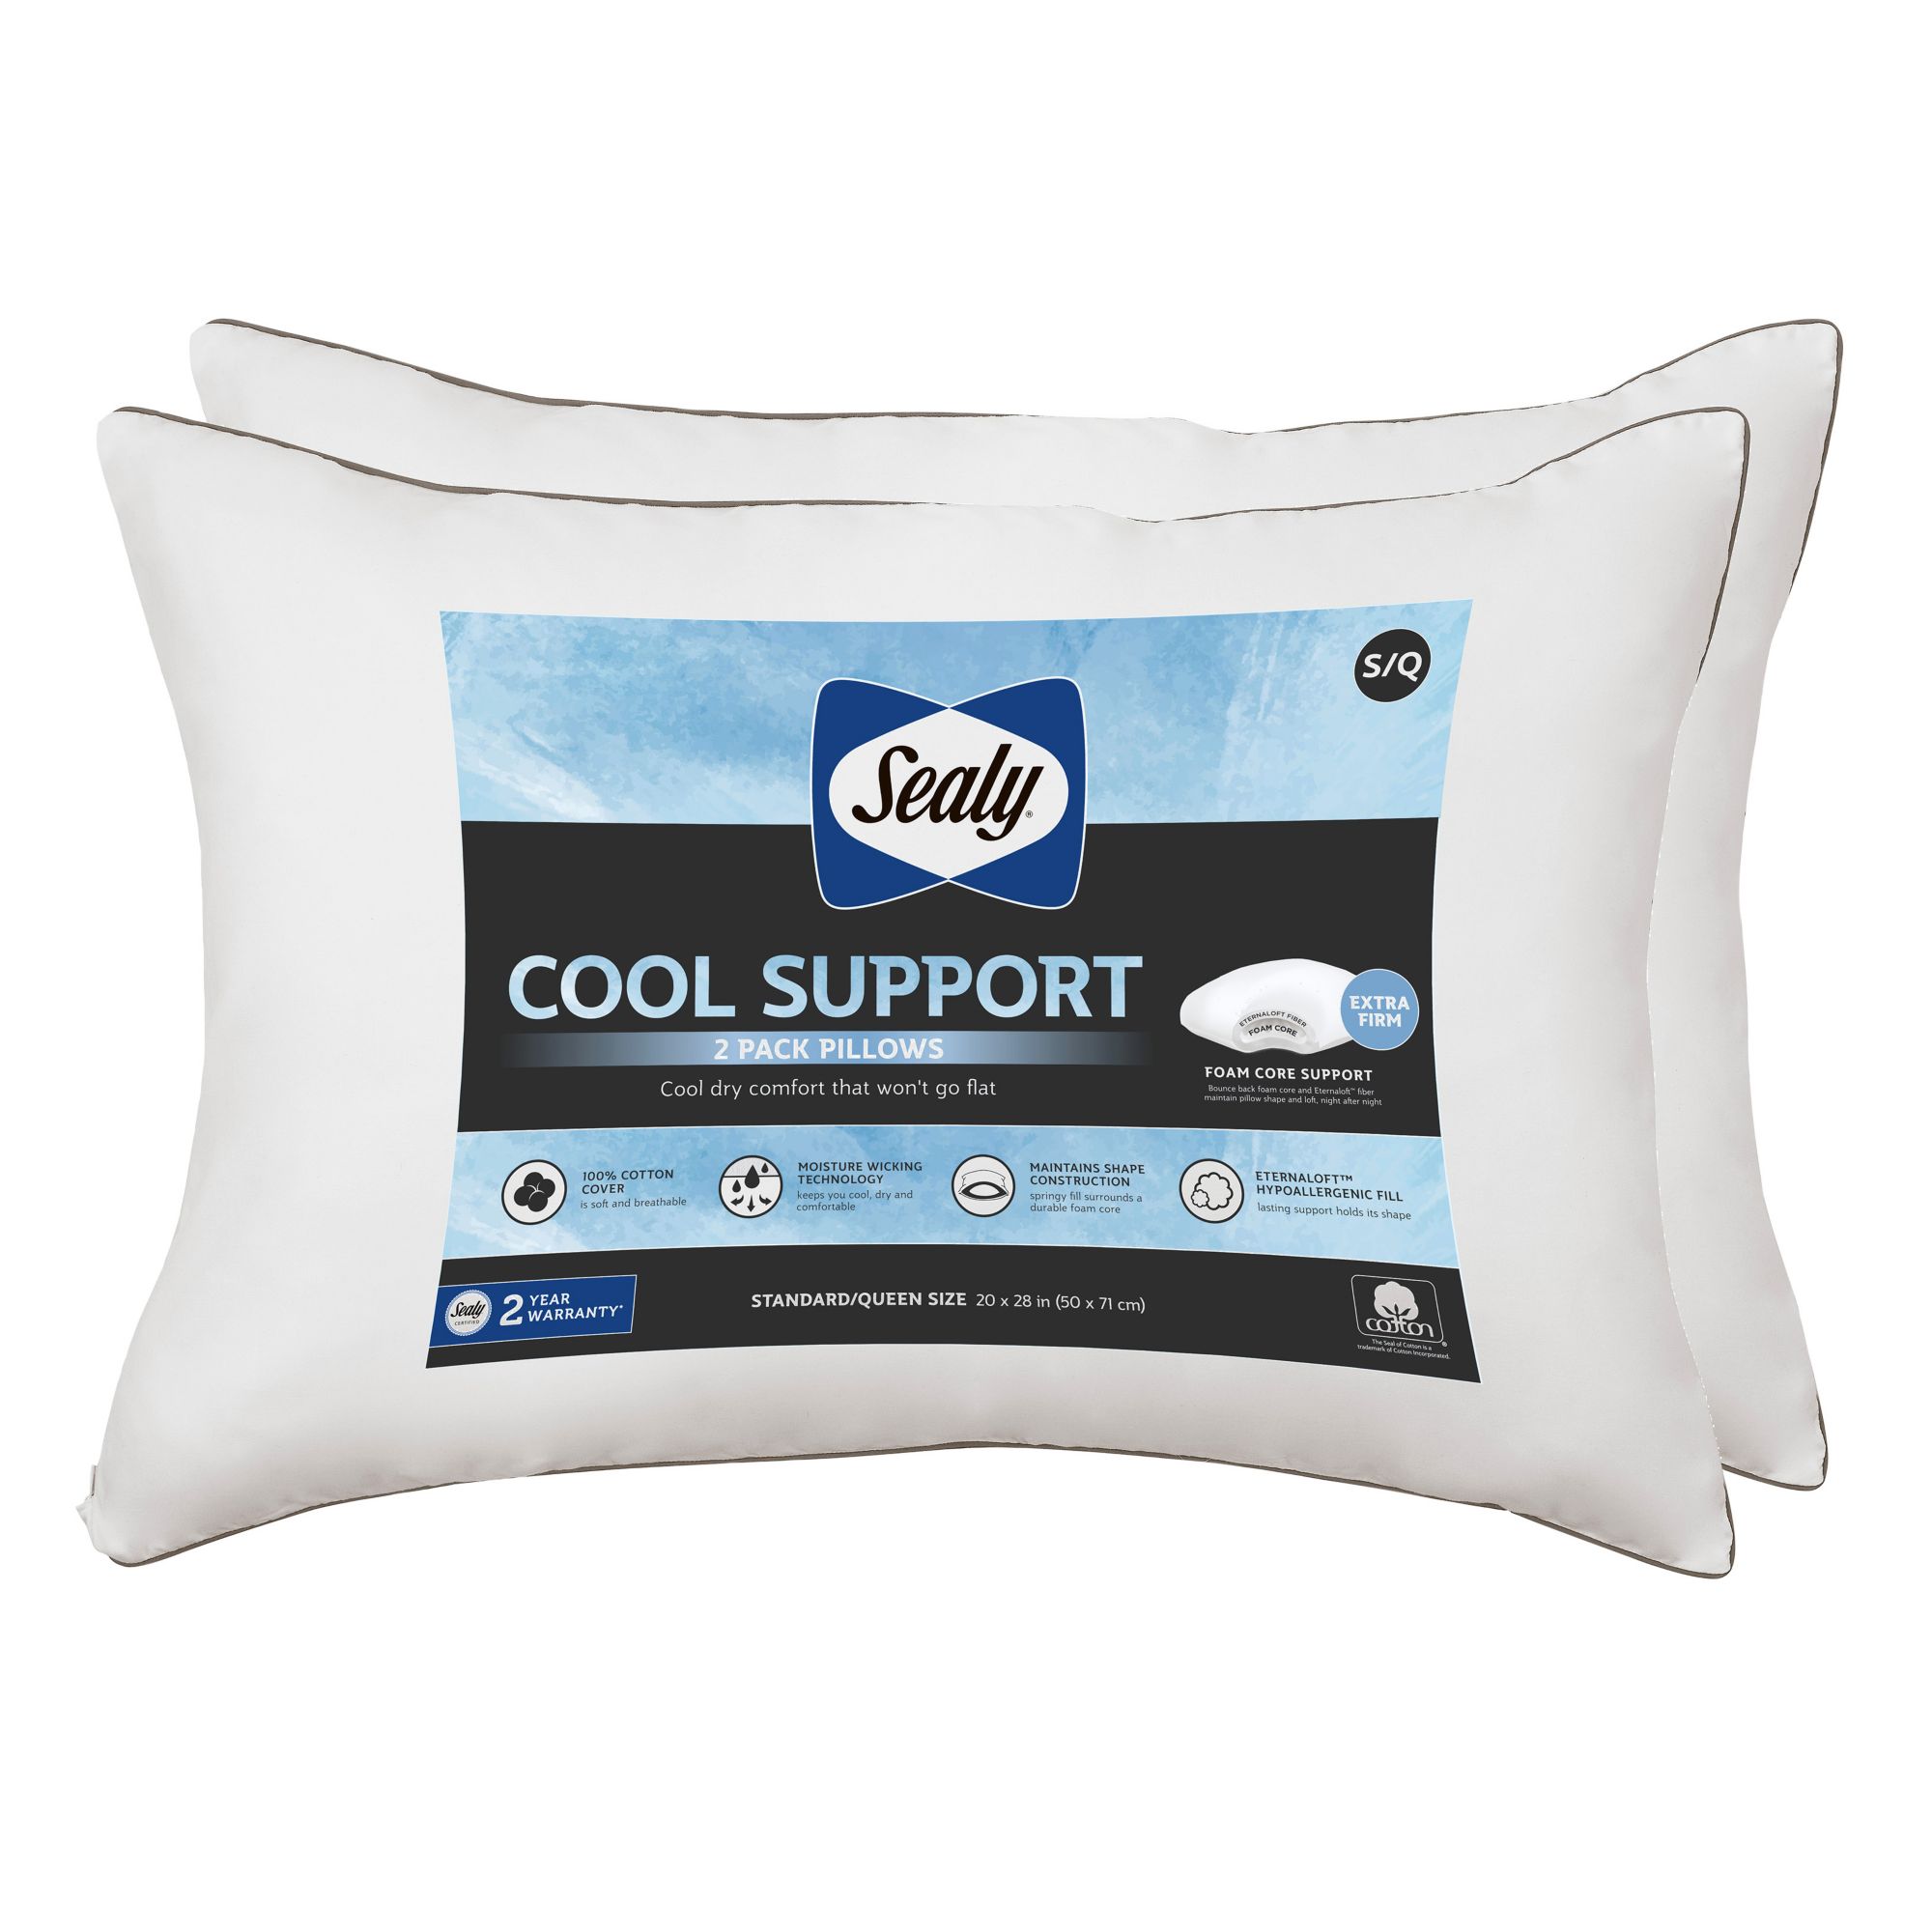 MyPillow Classic Series Standard-Size Bed Pillow